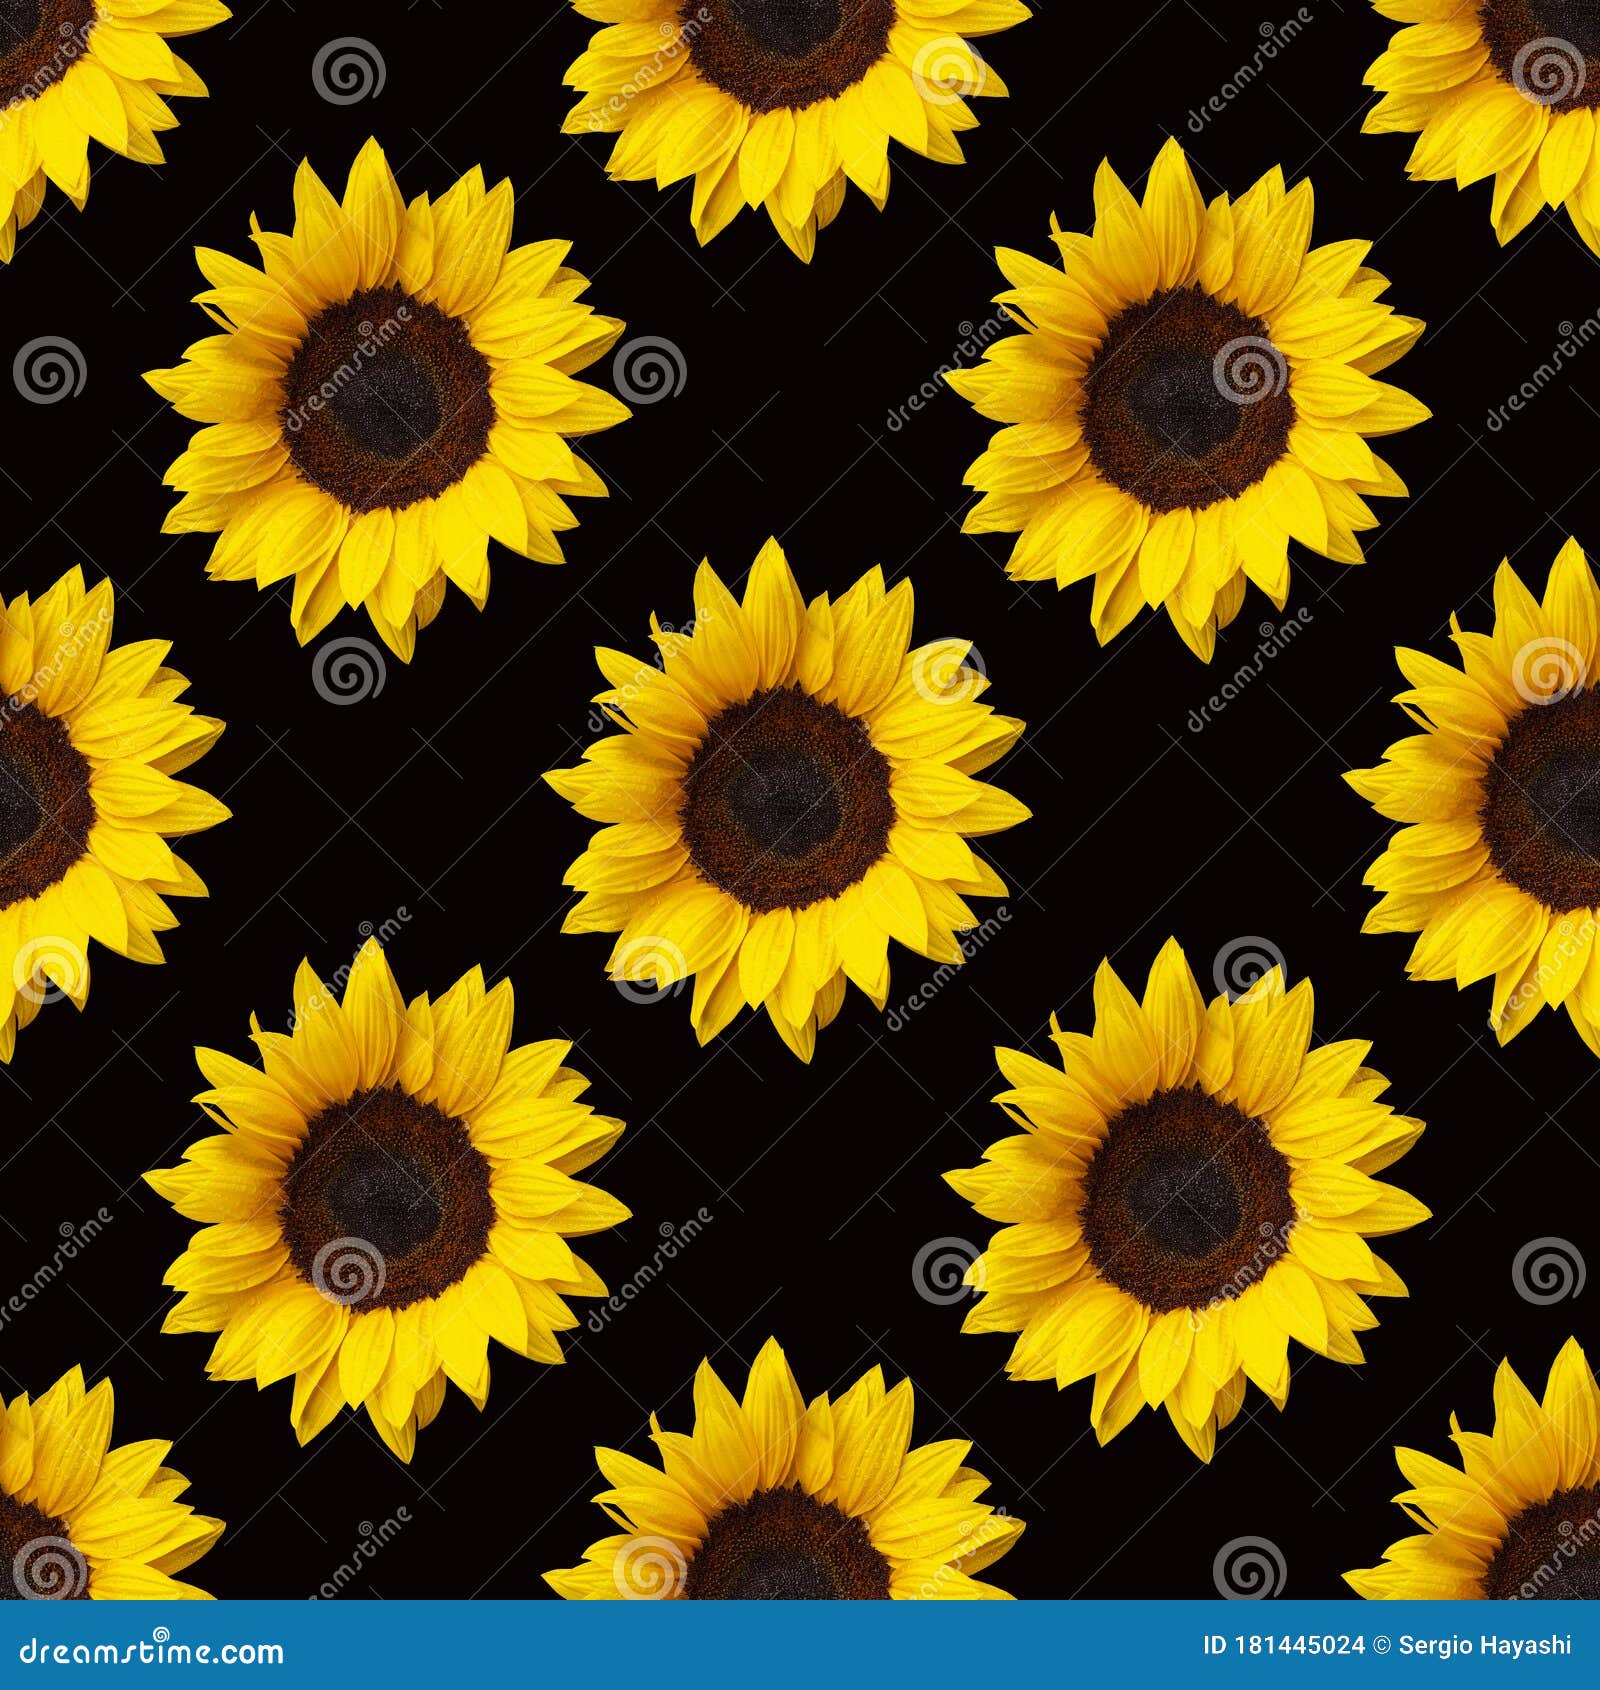 A yellow sunflower with a black background photo  Free On Image on Unsplash